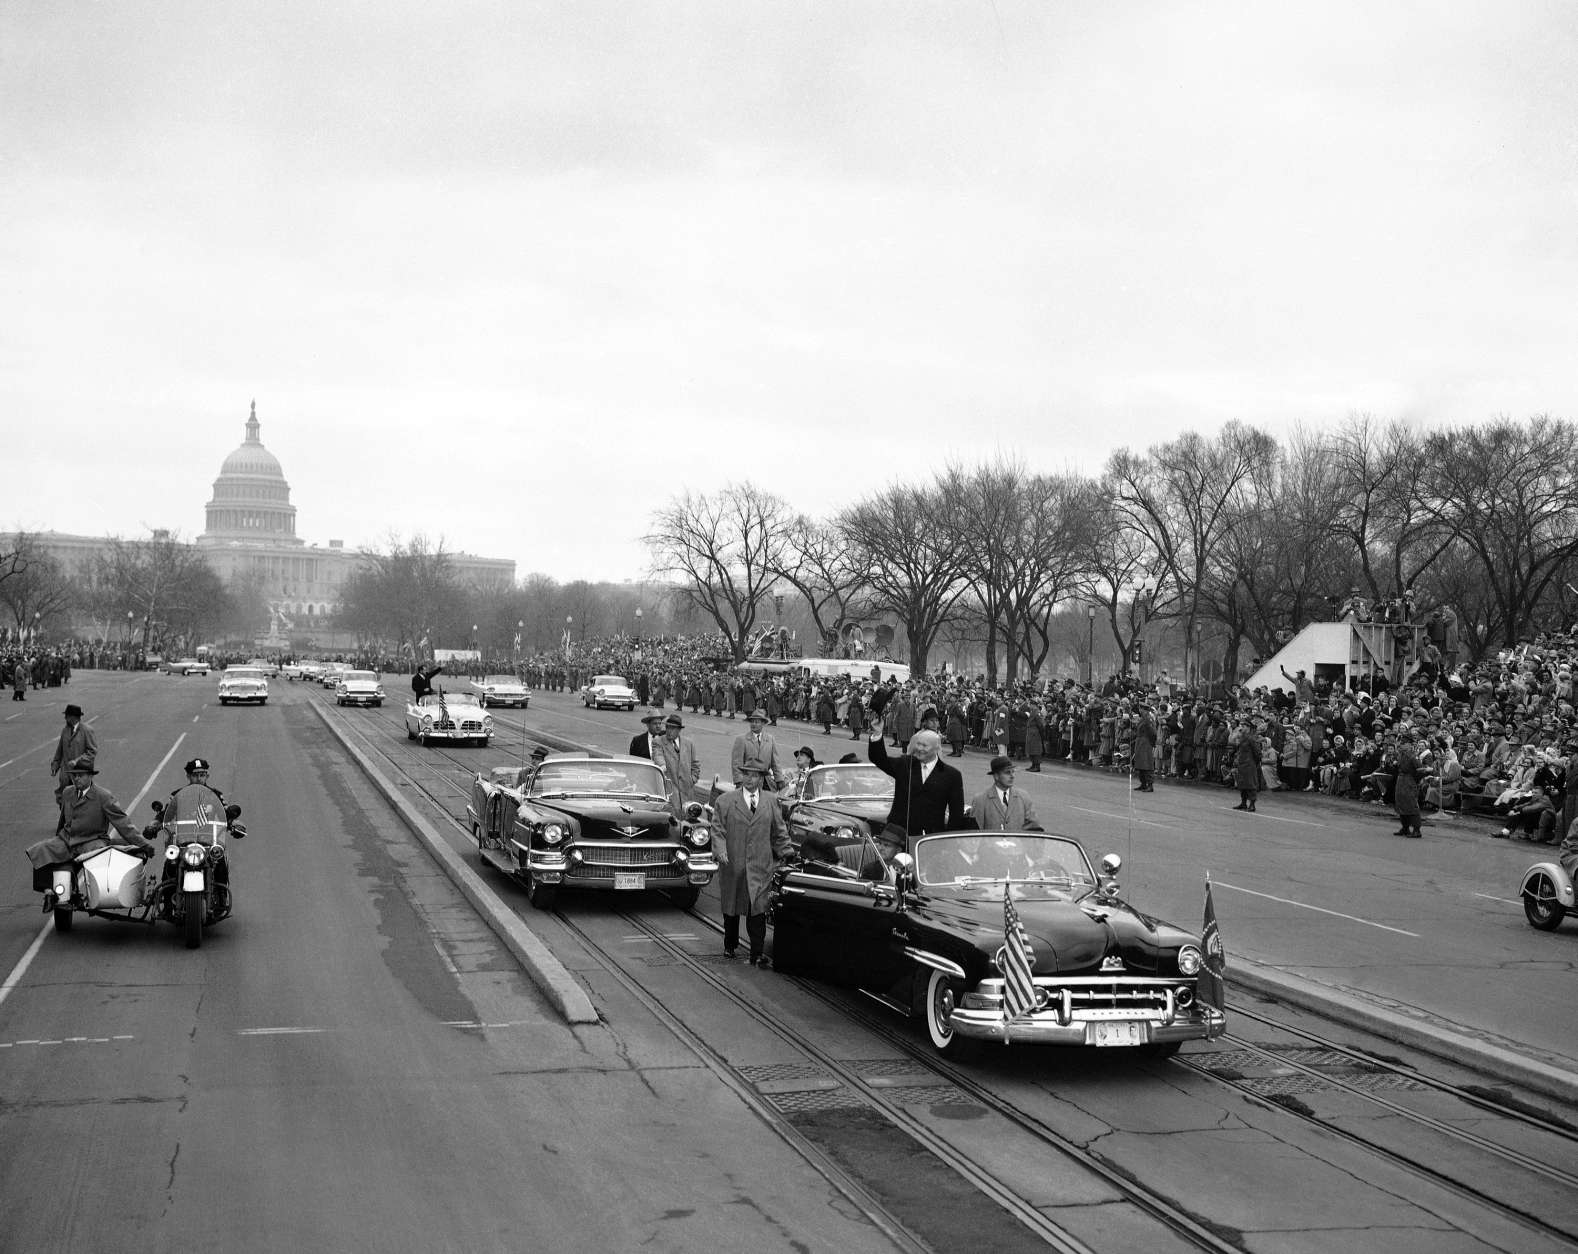 President Dwight Eisenhower stands in his open car and waves as he leaves the Capitol just before swinging into Constitution Avenue on traditional inaugural parade route in Washington on Jan. 21, 1957. (AP Photo)